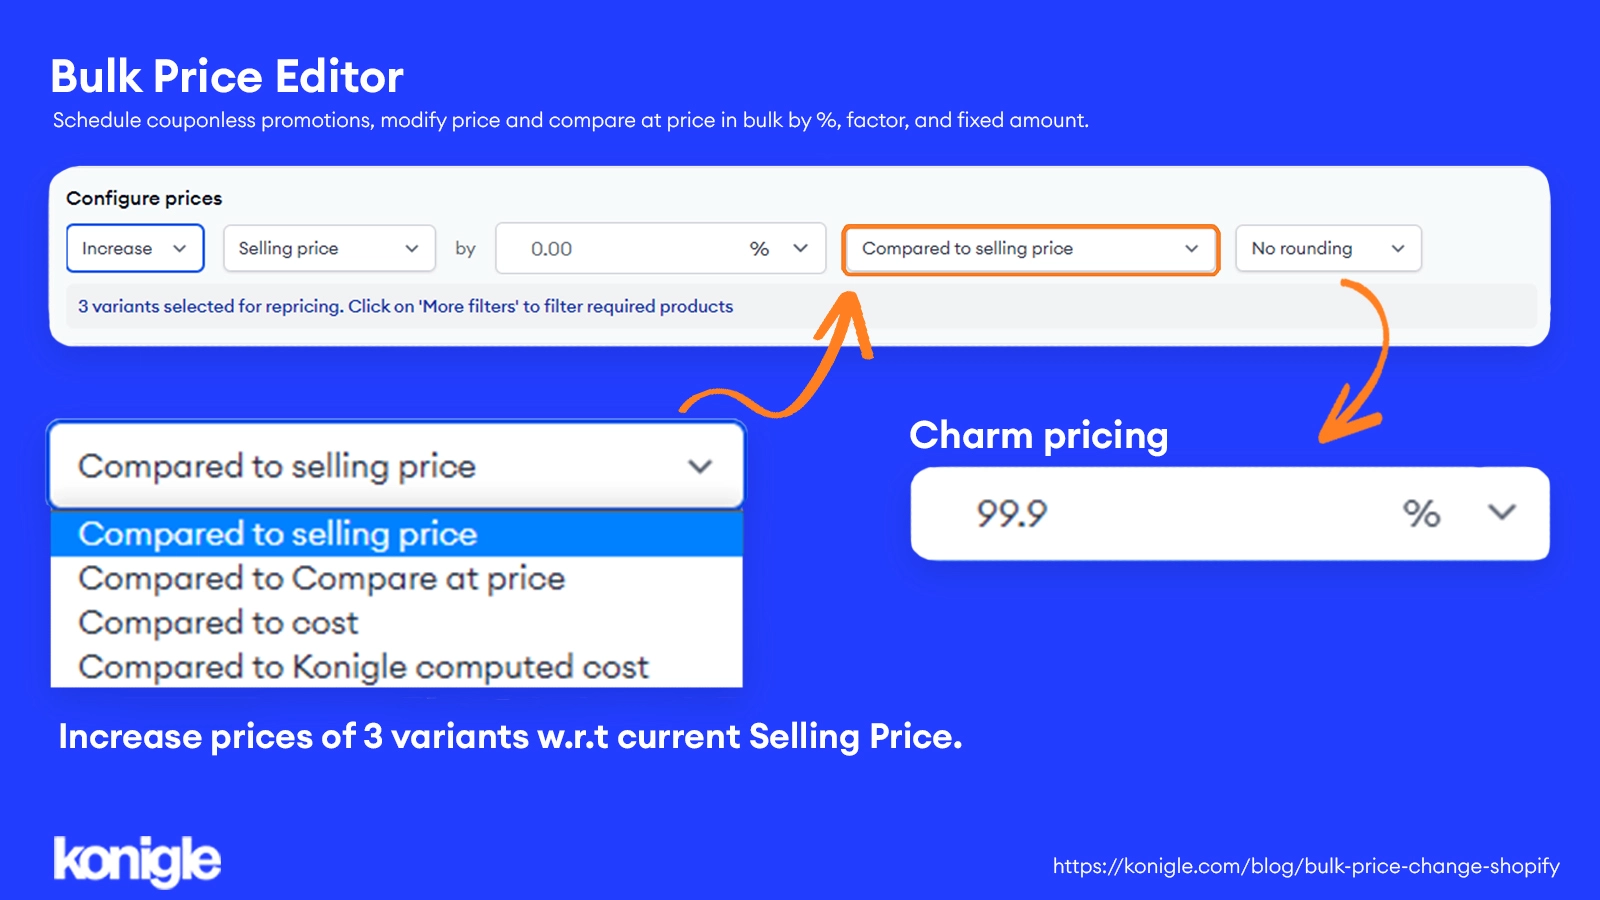 &nbsp; Trying to configure pricing and implementing charm pricing.<br>